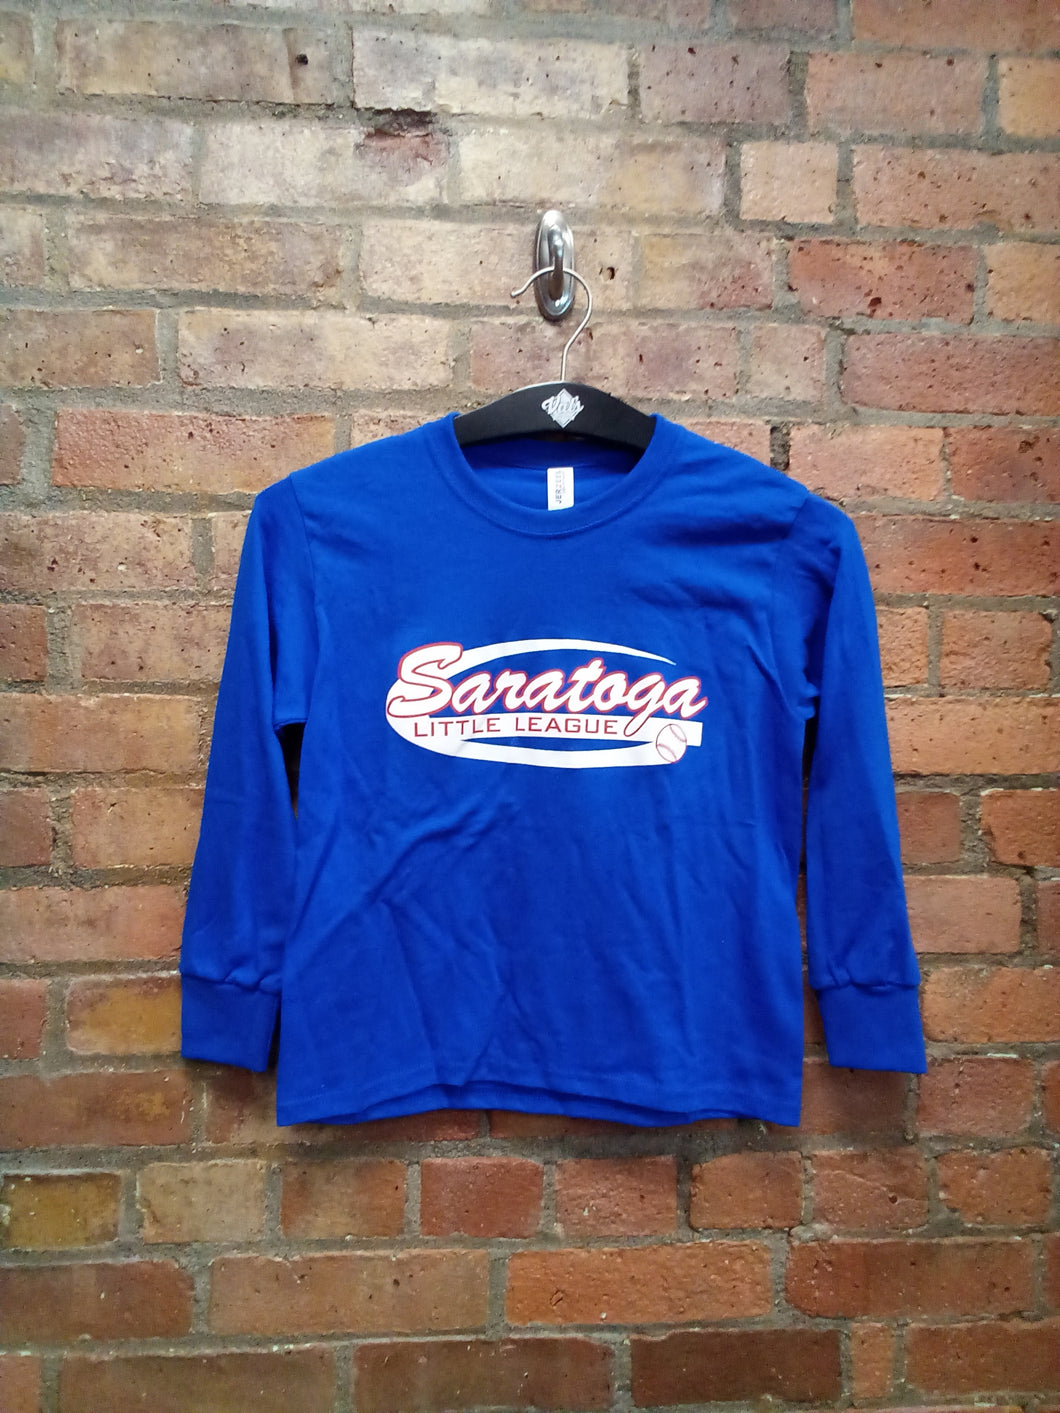 CLEARANCE - Saratoga Little League Youth Long Sleeved Shirt -  Size Small